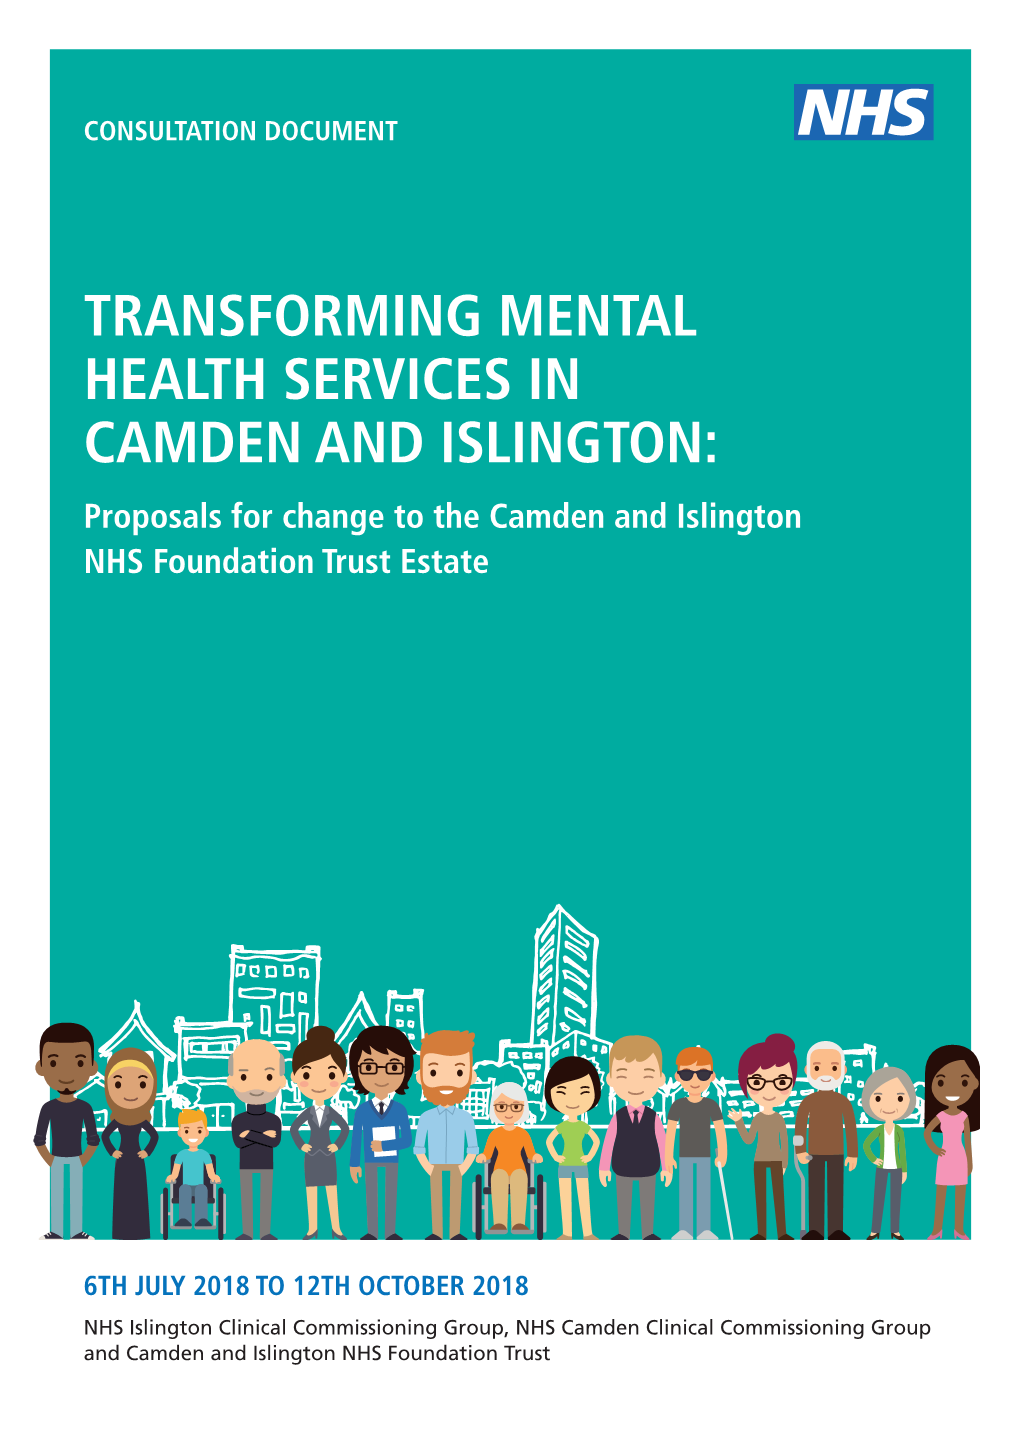 TRANSFORMING MENTAL HEALTH SERVICES in CAMDEN and ISLINGTON: Proposals for Change to the Camden and Islington NHS Foundation Trust Estate